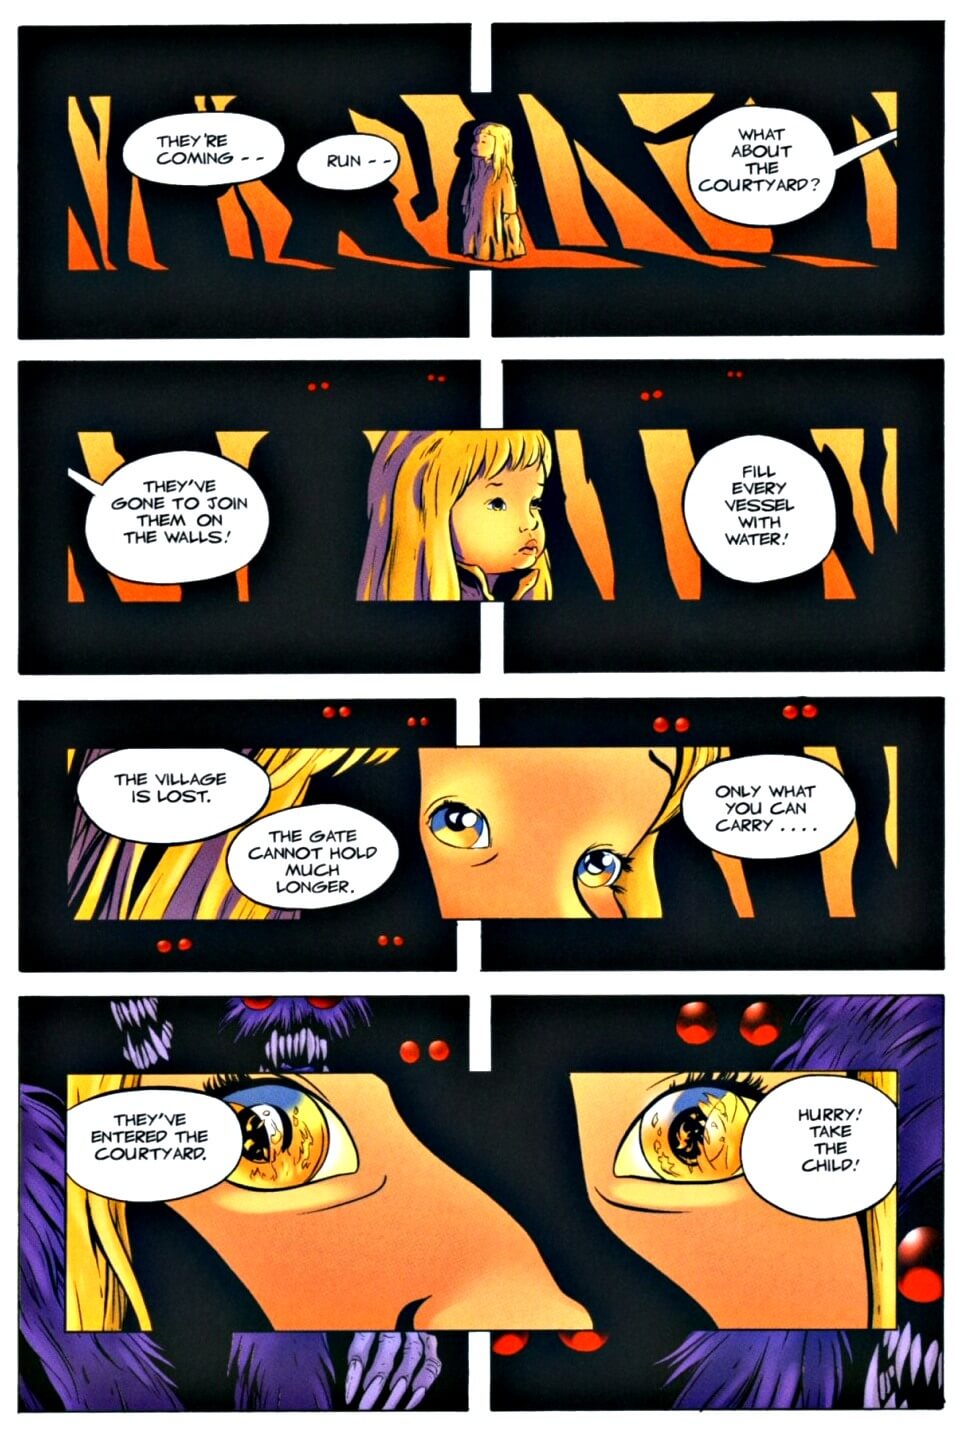 page 3 chapter 1 of bone 9 crown of horns graphic novel